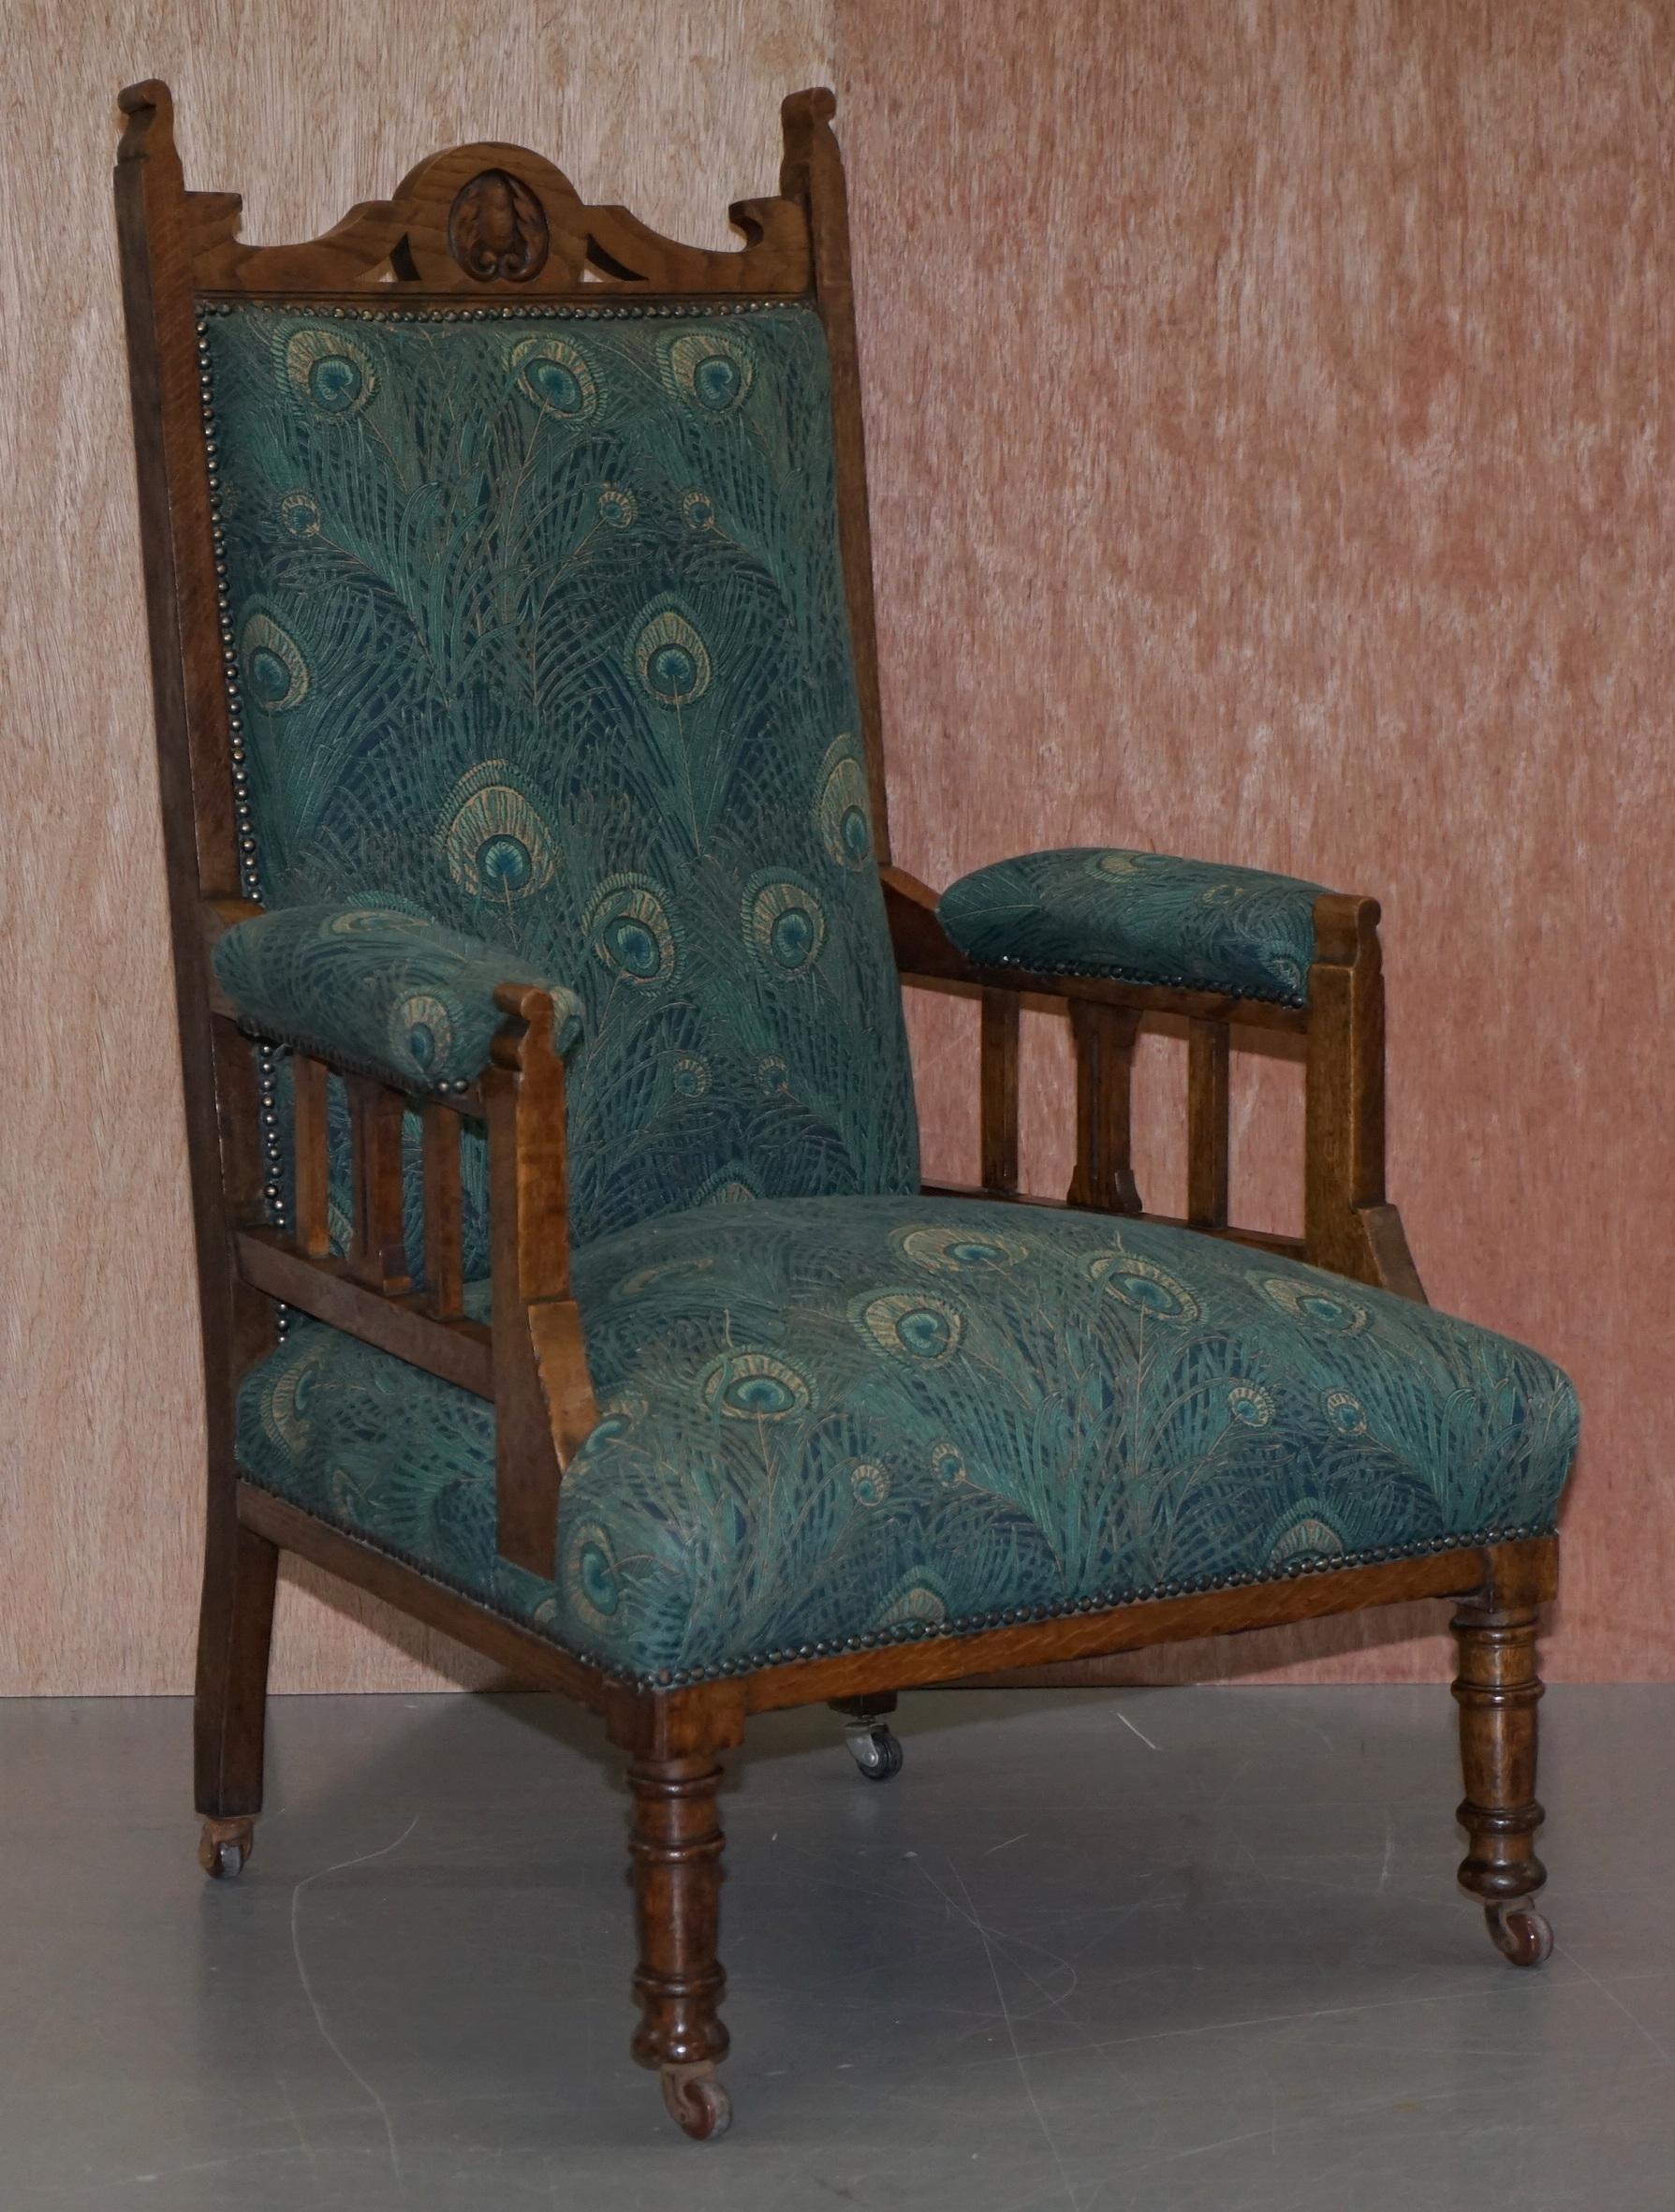 Royal House Antiques

Royal House Antiques is delighted to offer for sale this lovely pair of Liberty's London Hera upholstered English oak library reading armchairs 

Please note the delivery fee listed is just a guide, it covers within the M25